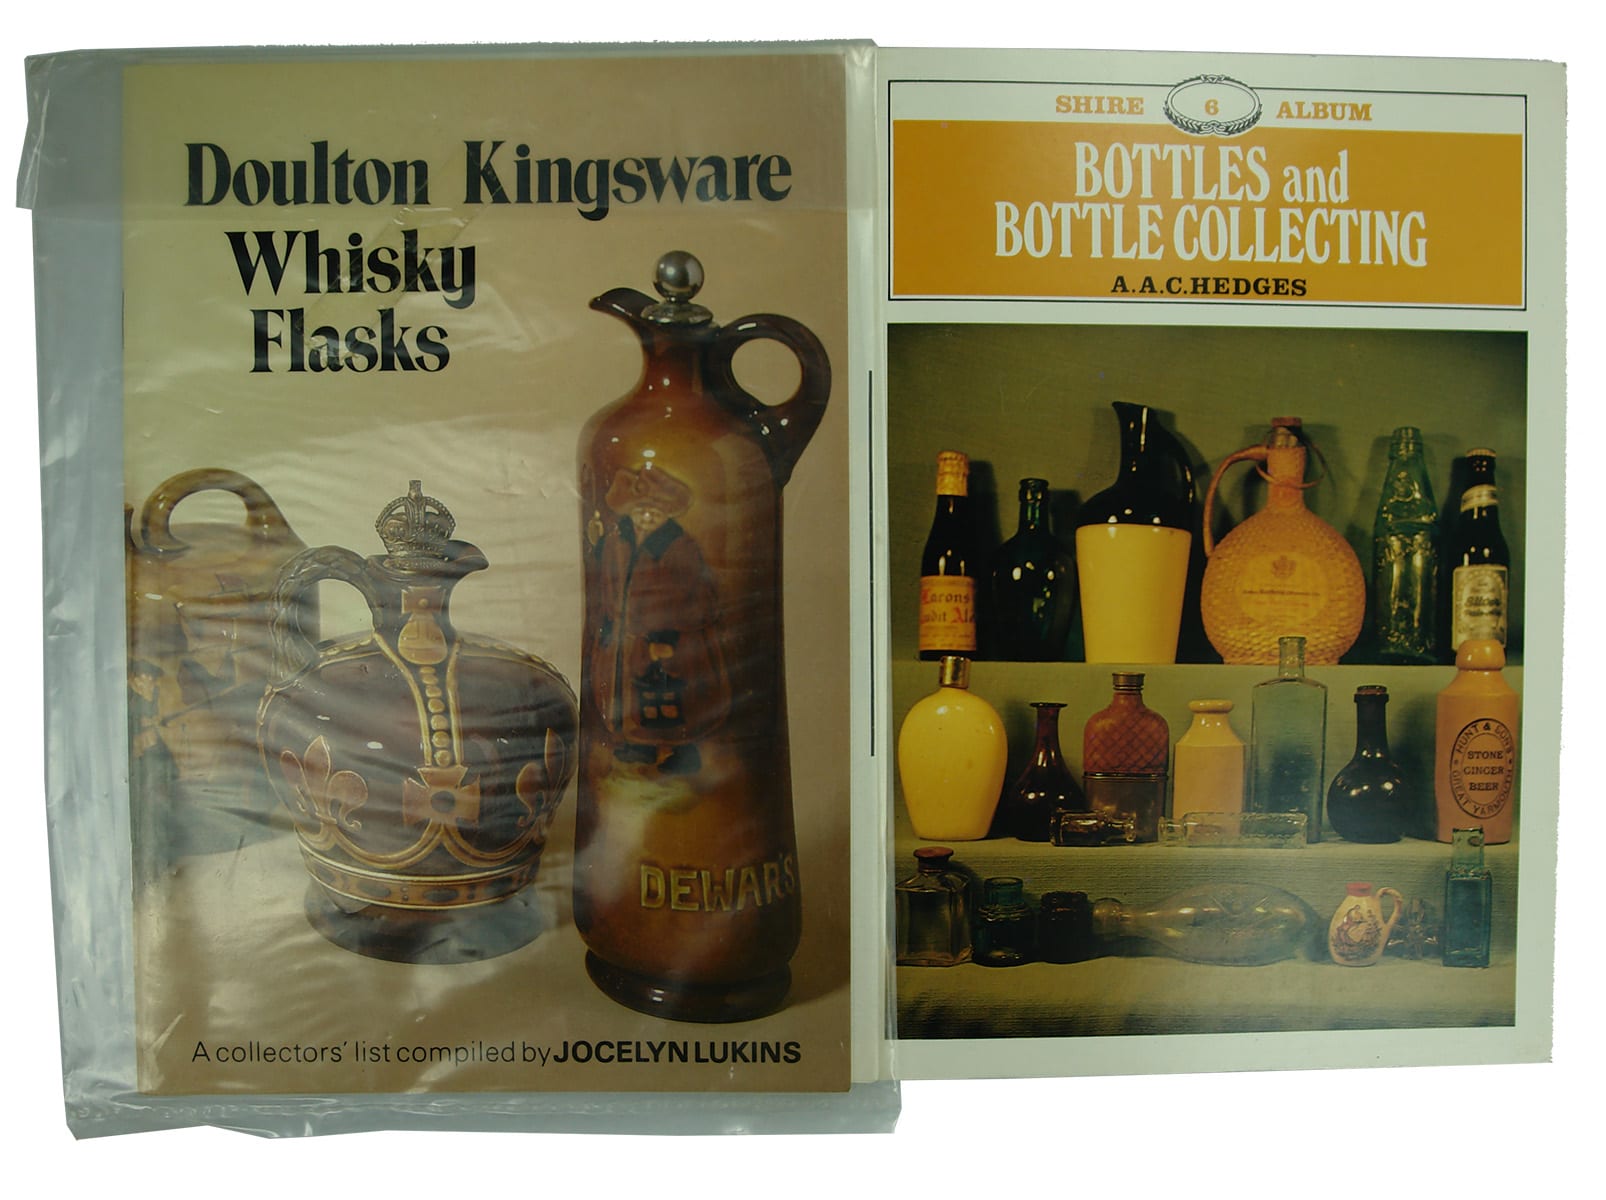 Bottle Collecting reference books